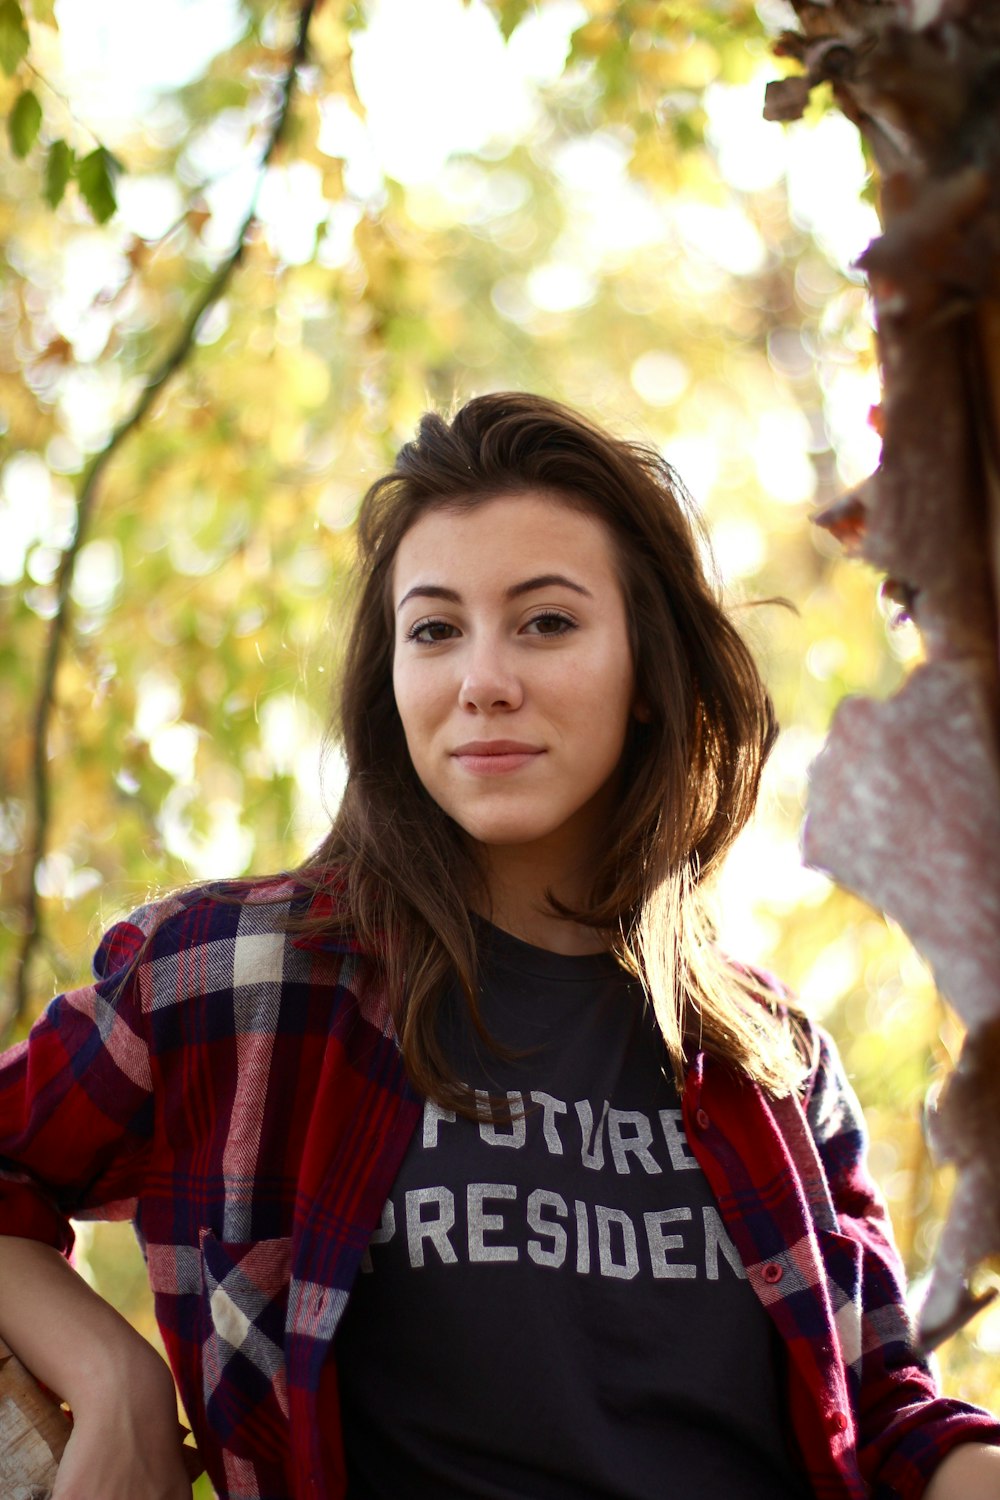 woman wearing black shirt and red-white-blue plaid jacket across blurry tree background